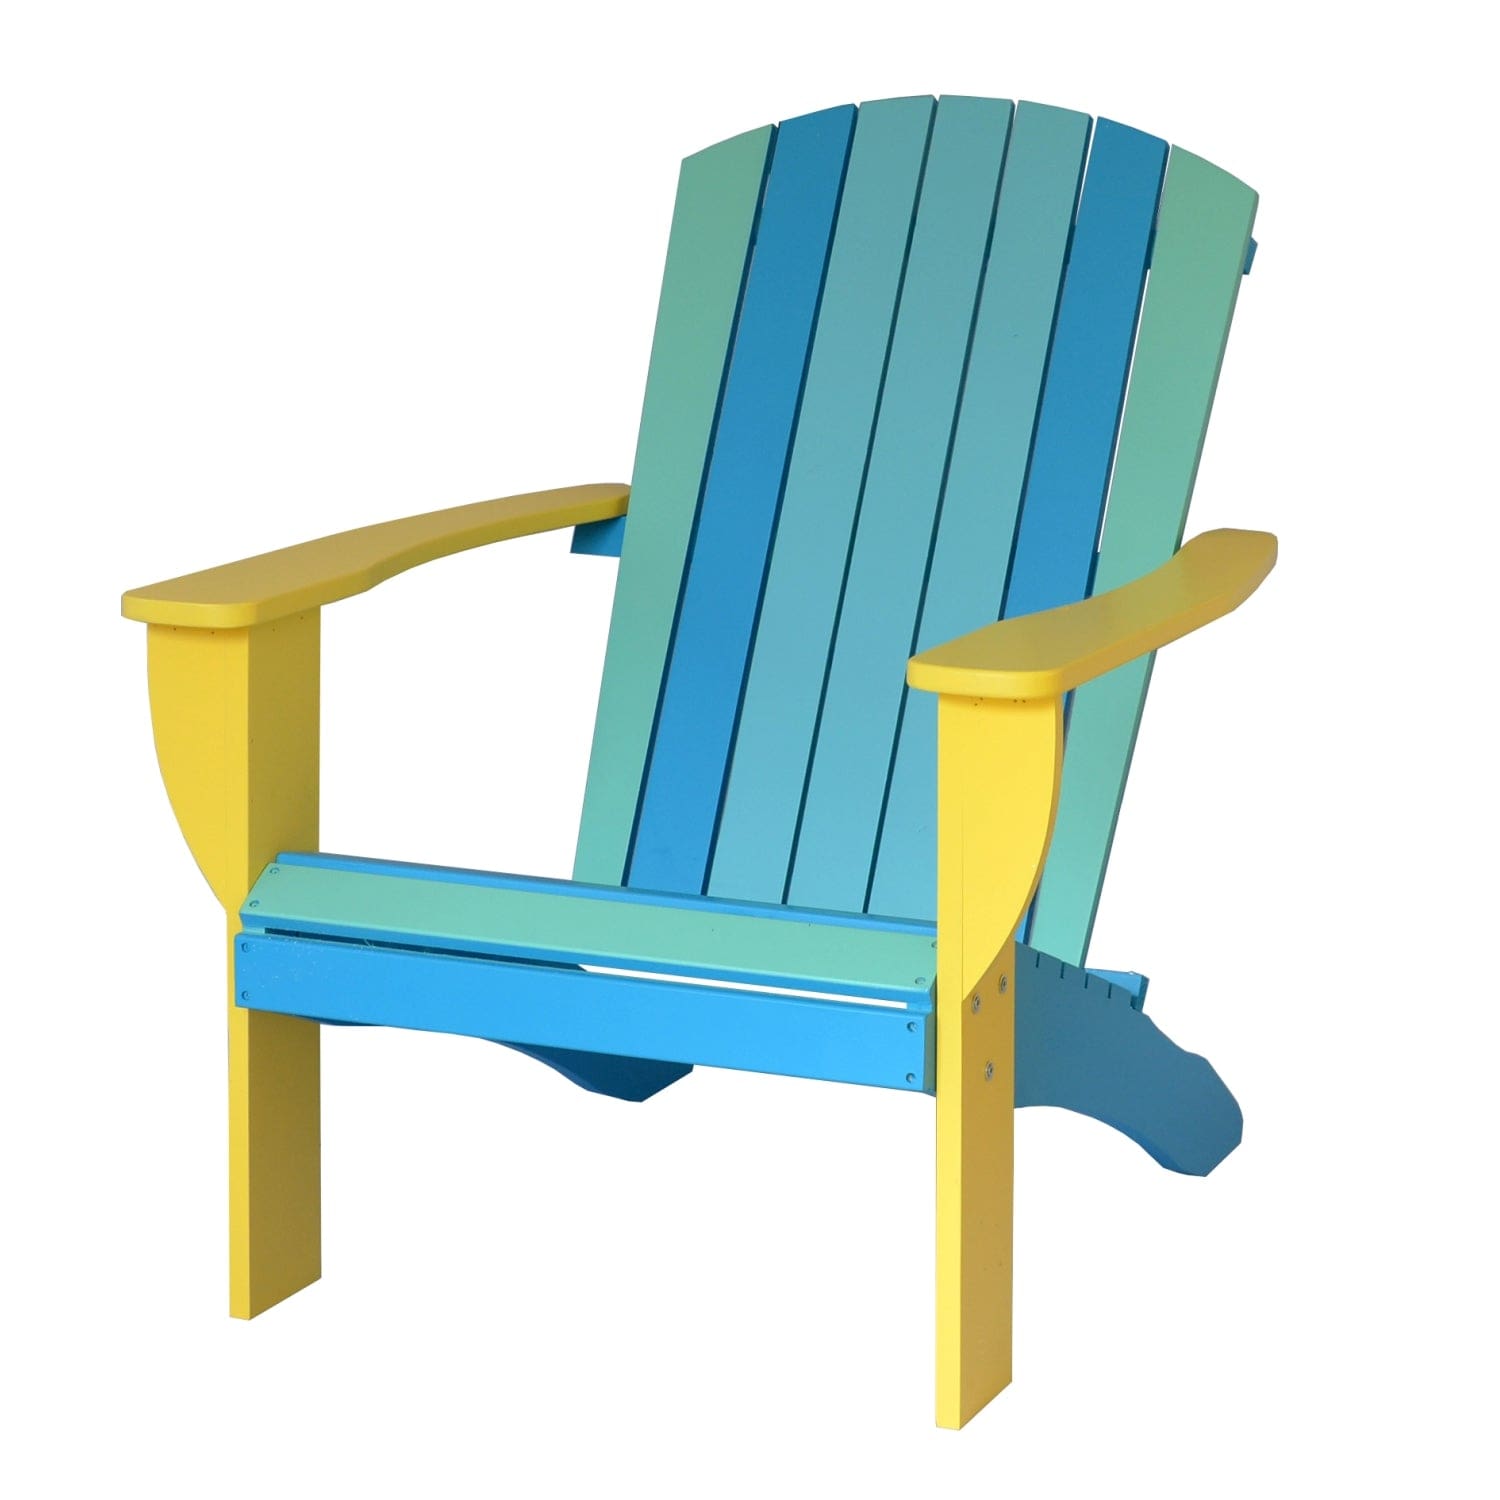 Riverstone Industries Outdoor Chairs Riverstone | Adirondack Chair with Side Table - Tropical Beach RSI-AC-BG-T